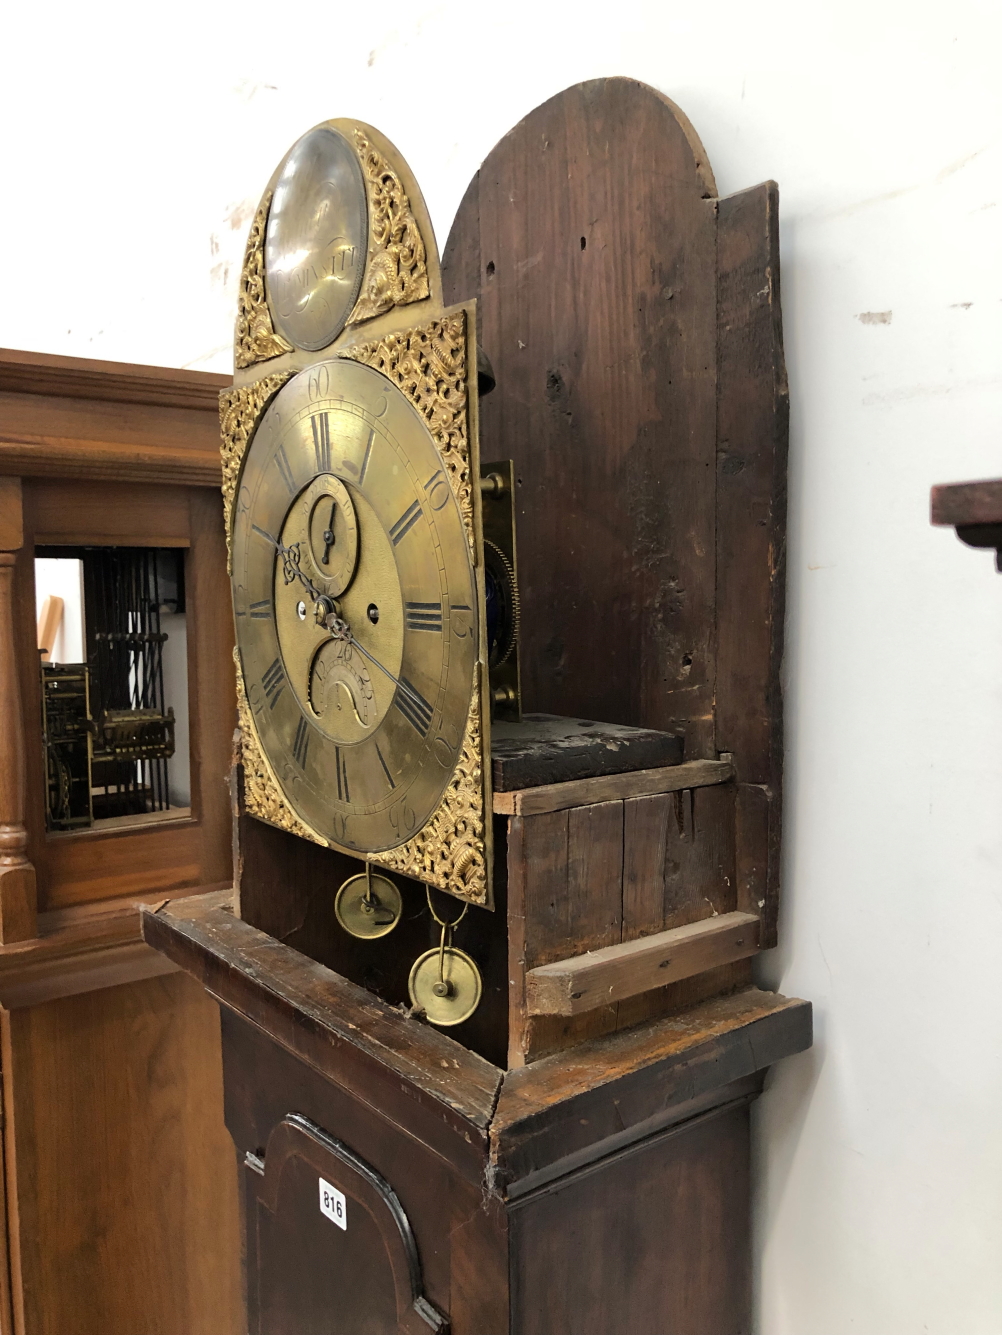 BENJAMIN FIELDROUSE, LEOMINSTER, A MAHOGANY LONG CASED CLOCK, THE BRASS ARCHED DIAL WITH - Image 21 of 24